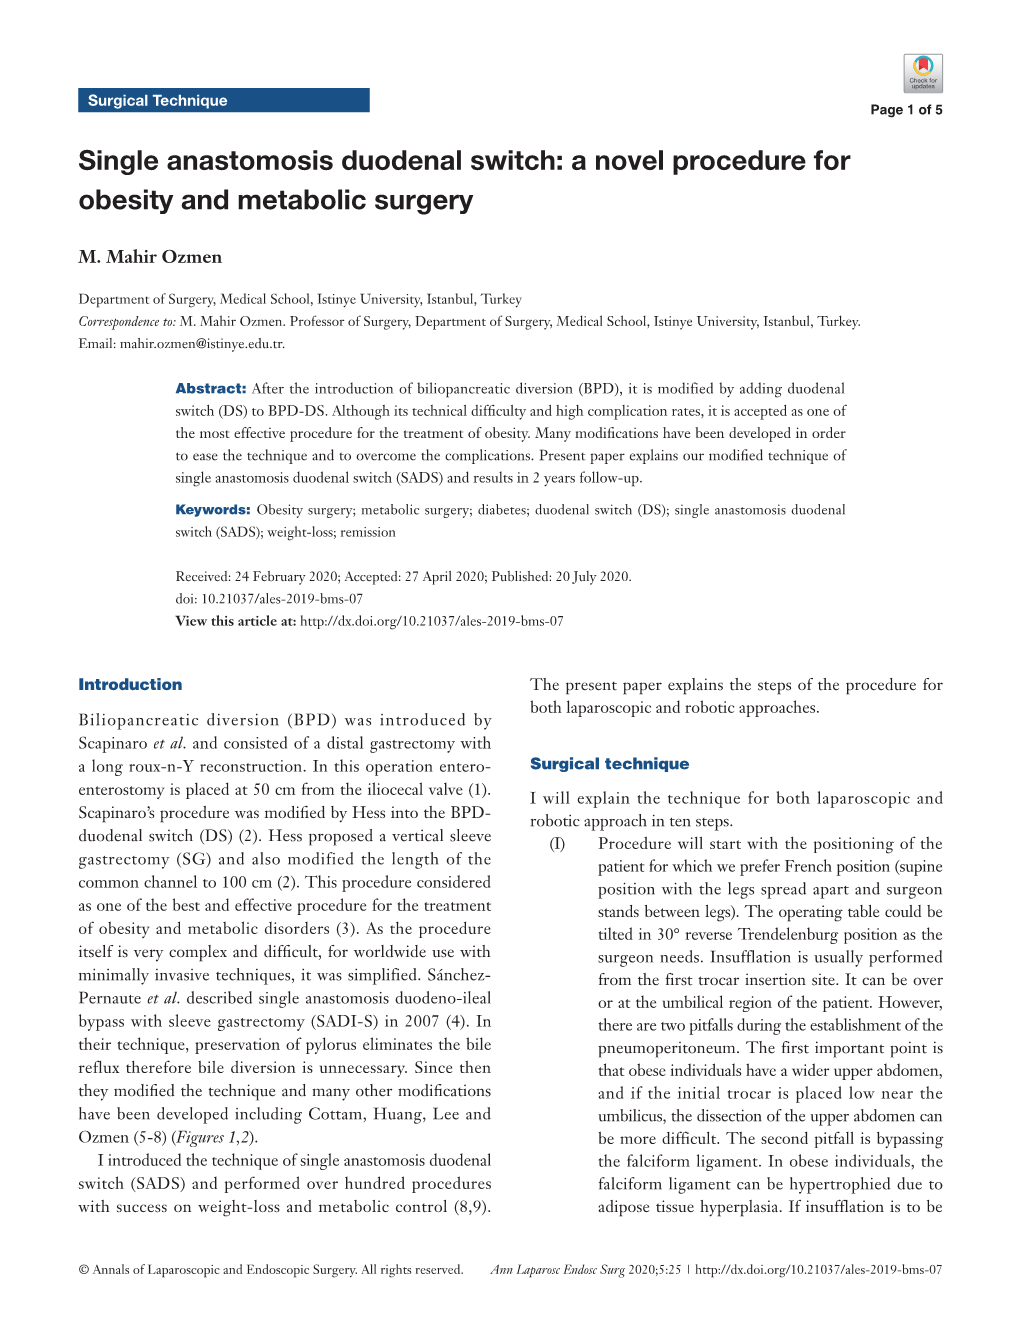 Single Anastomosis Duodenal Switch: a Novel Procedure for Obesity and Metabolic Surgery